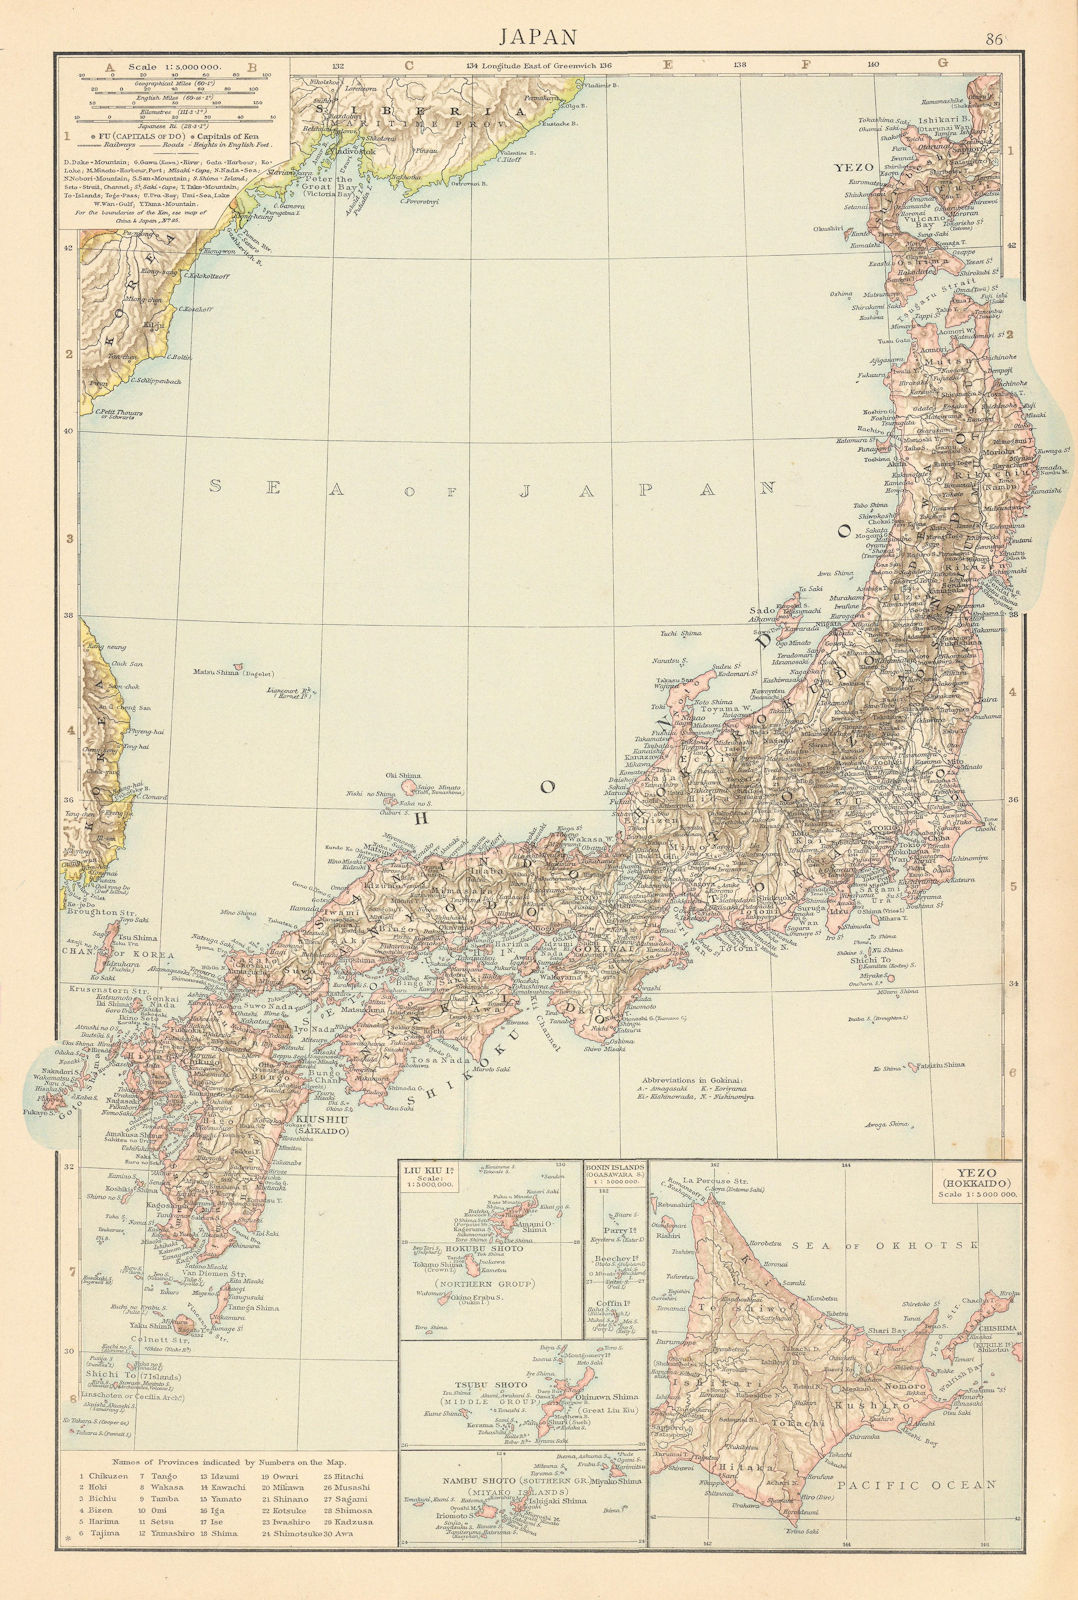 Associate Product Japan showing railways & treaty ports. THE TIMES 1895 old antique map chart